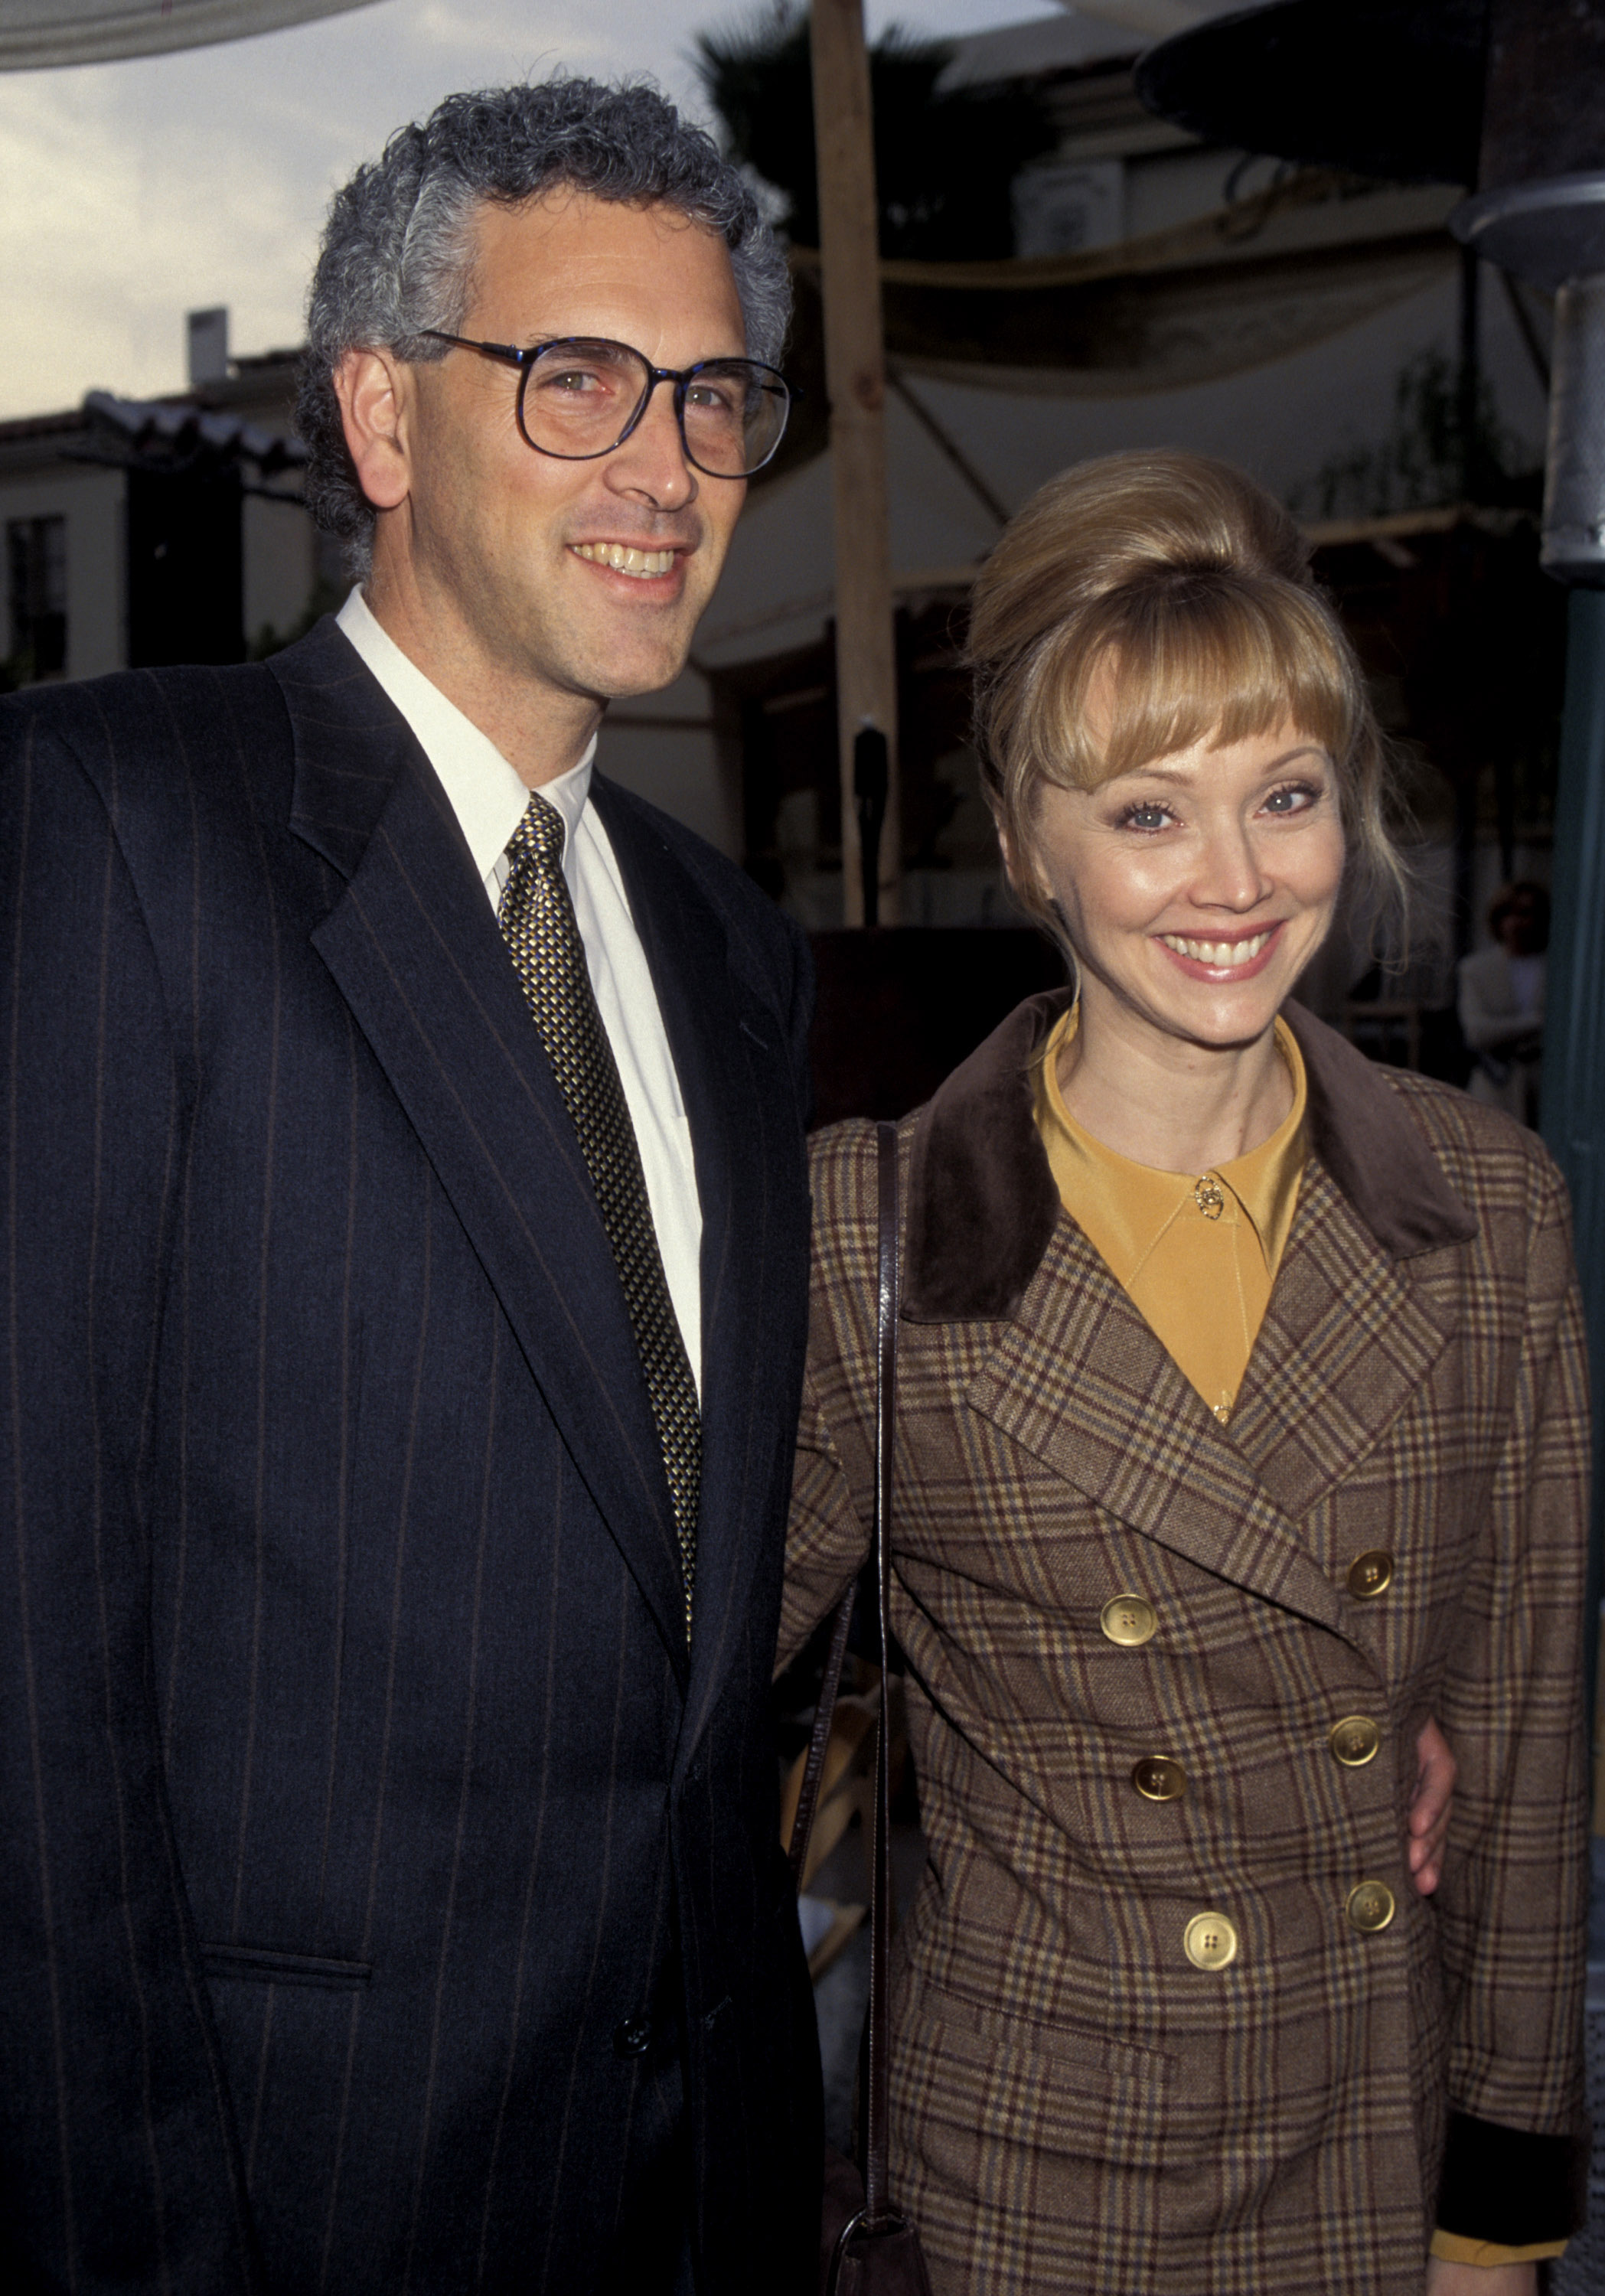 Bruce Tyson and Shelley Long in California in 1995 | Source: Getty Images